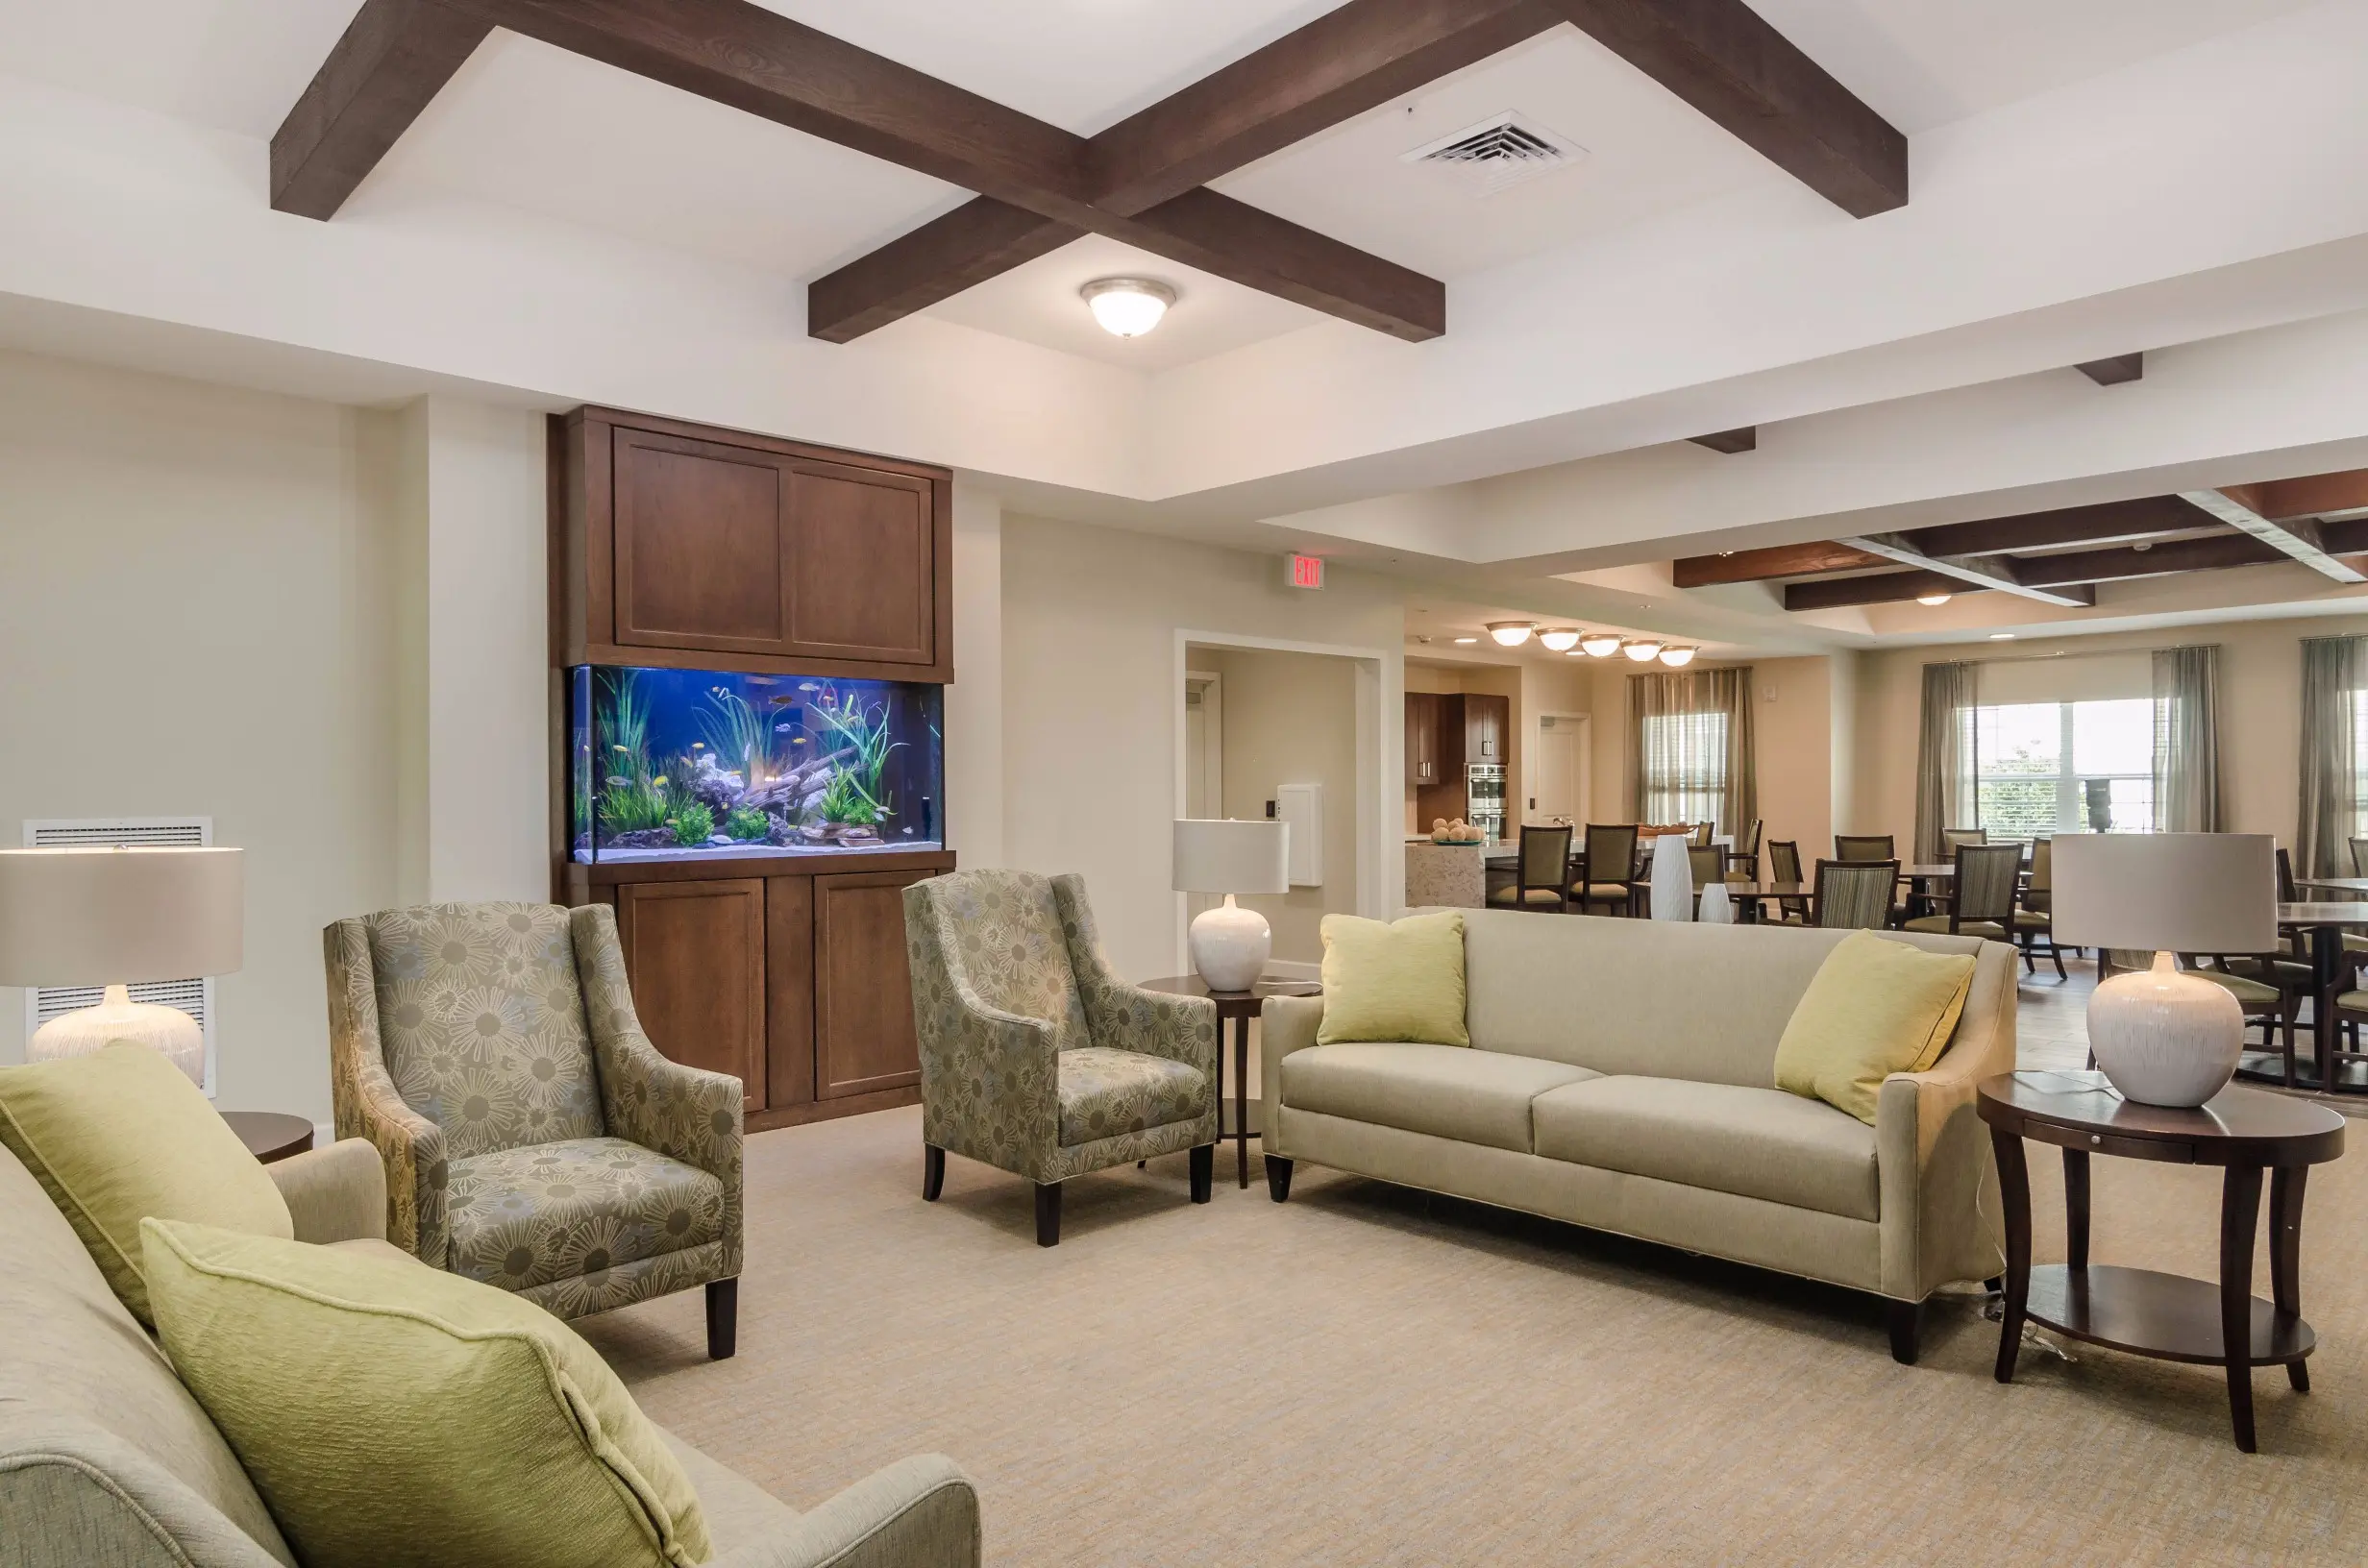 Common / dining area at American House Coconut Point, a senior living community in Estero, FL